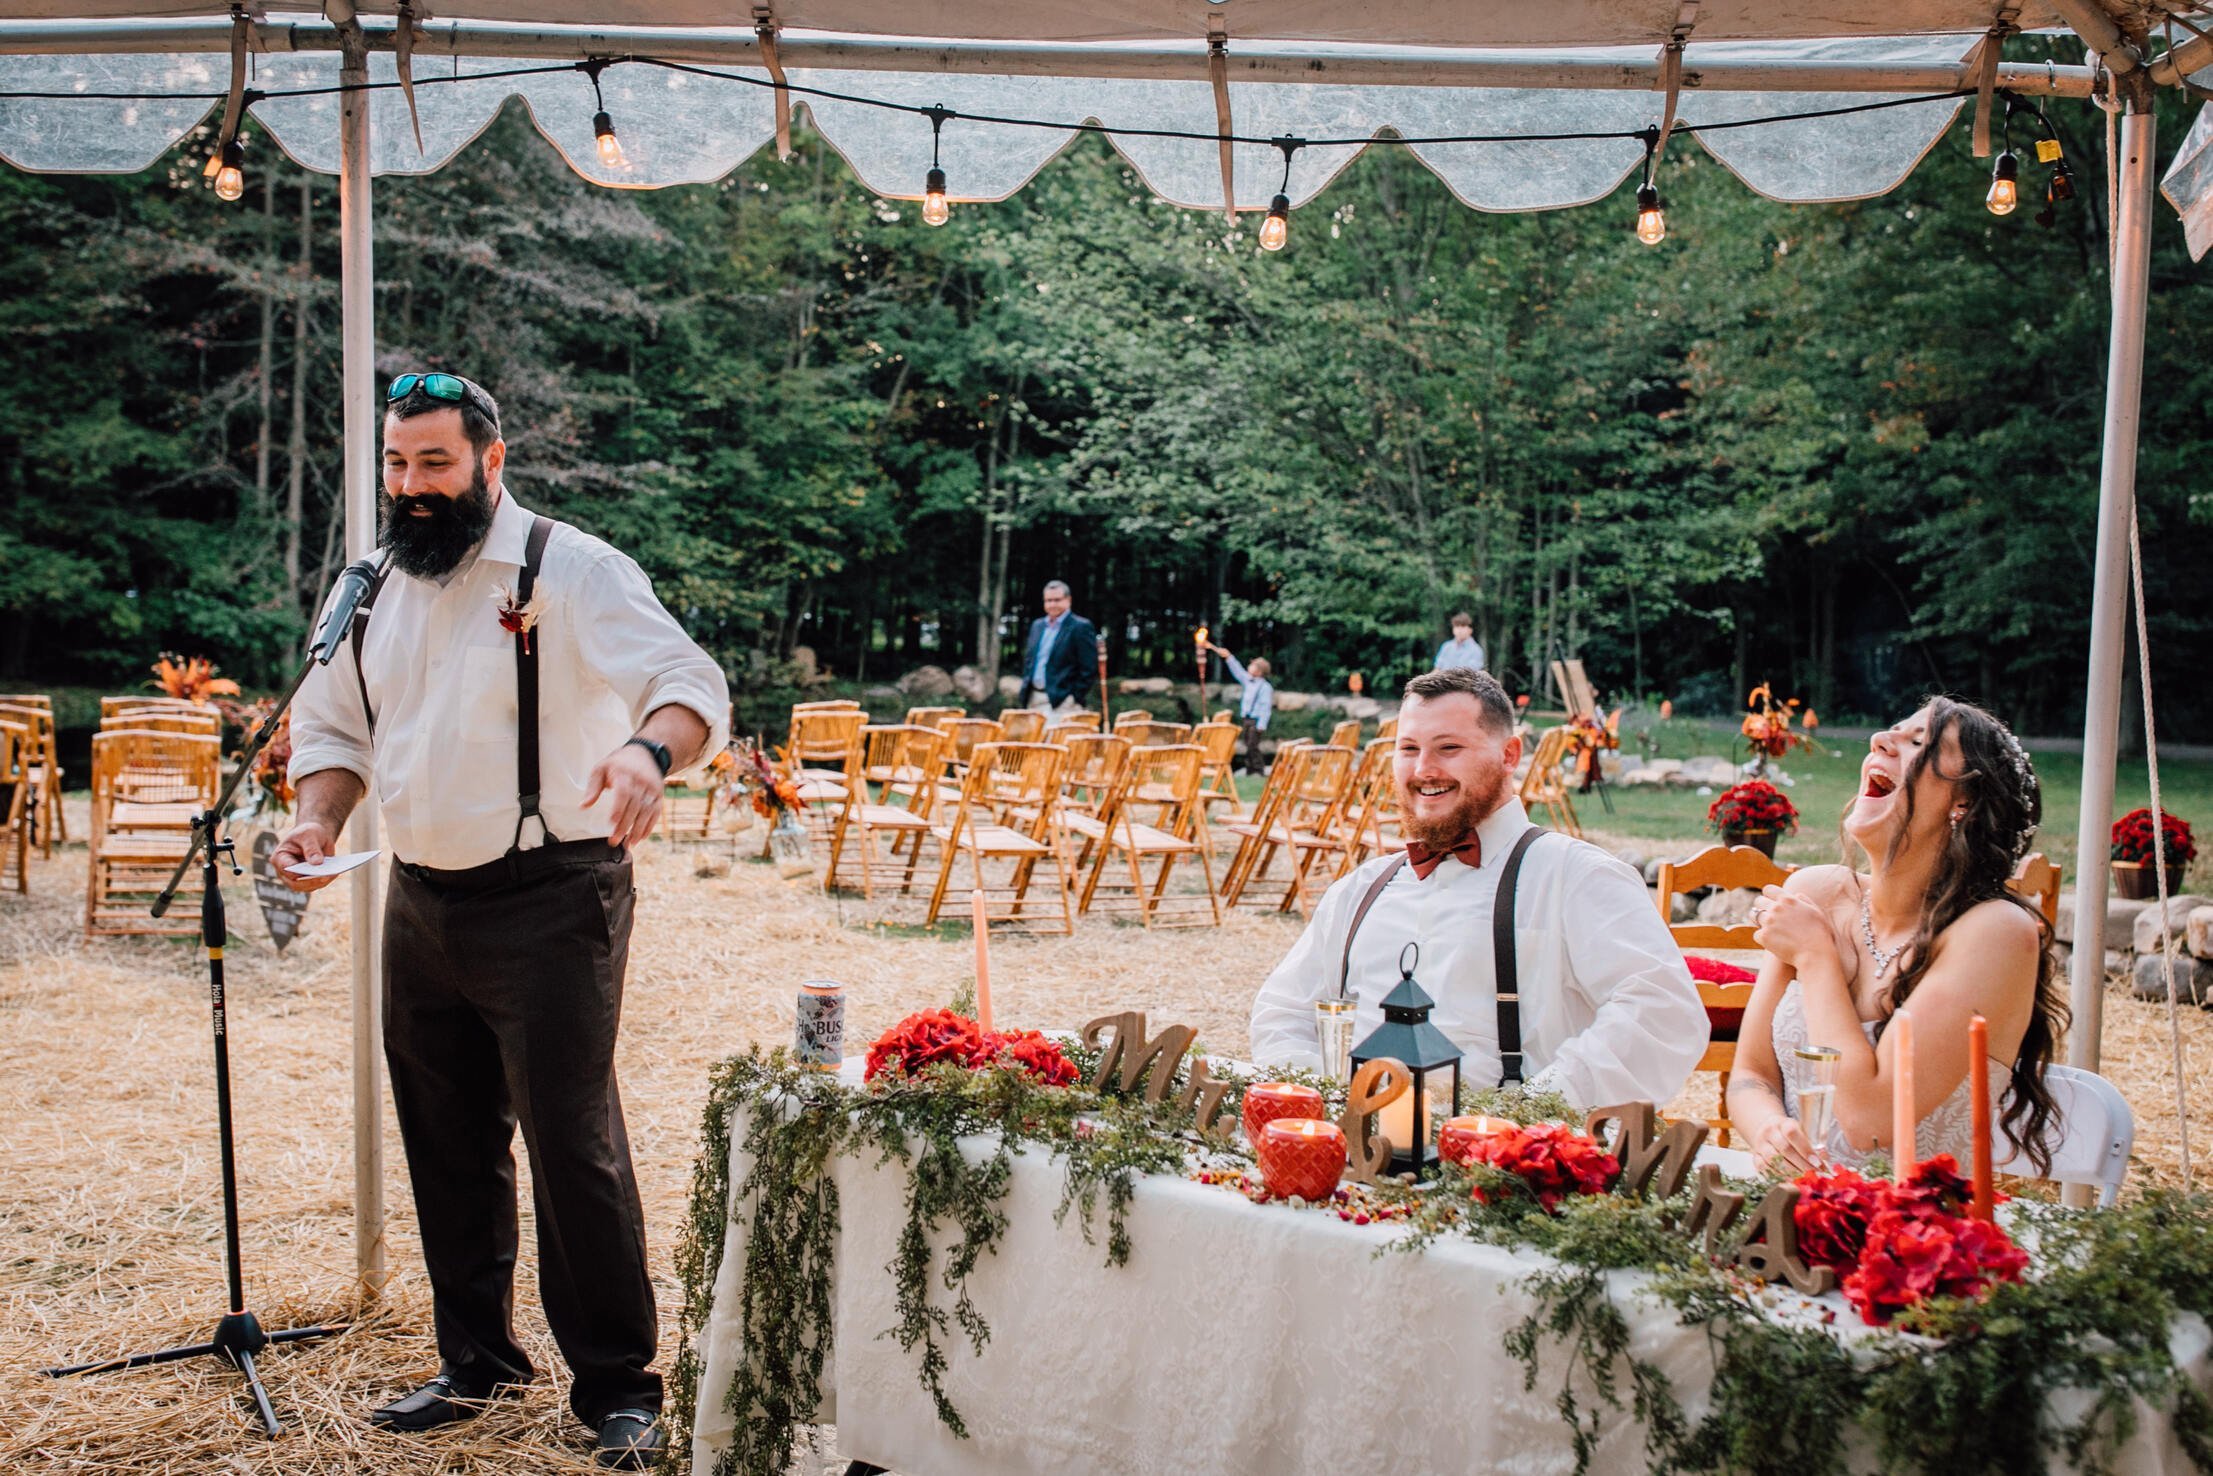  The best man gives a toast at a rustic wedding under a clear tent 